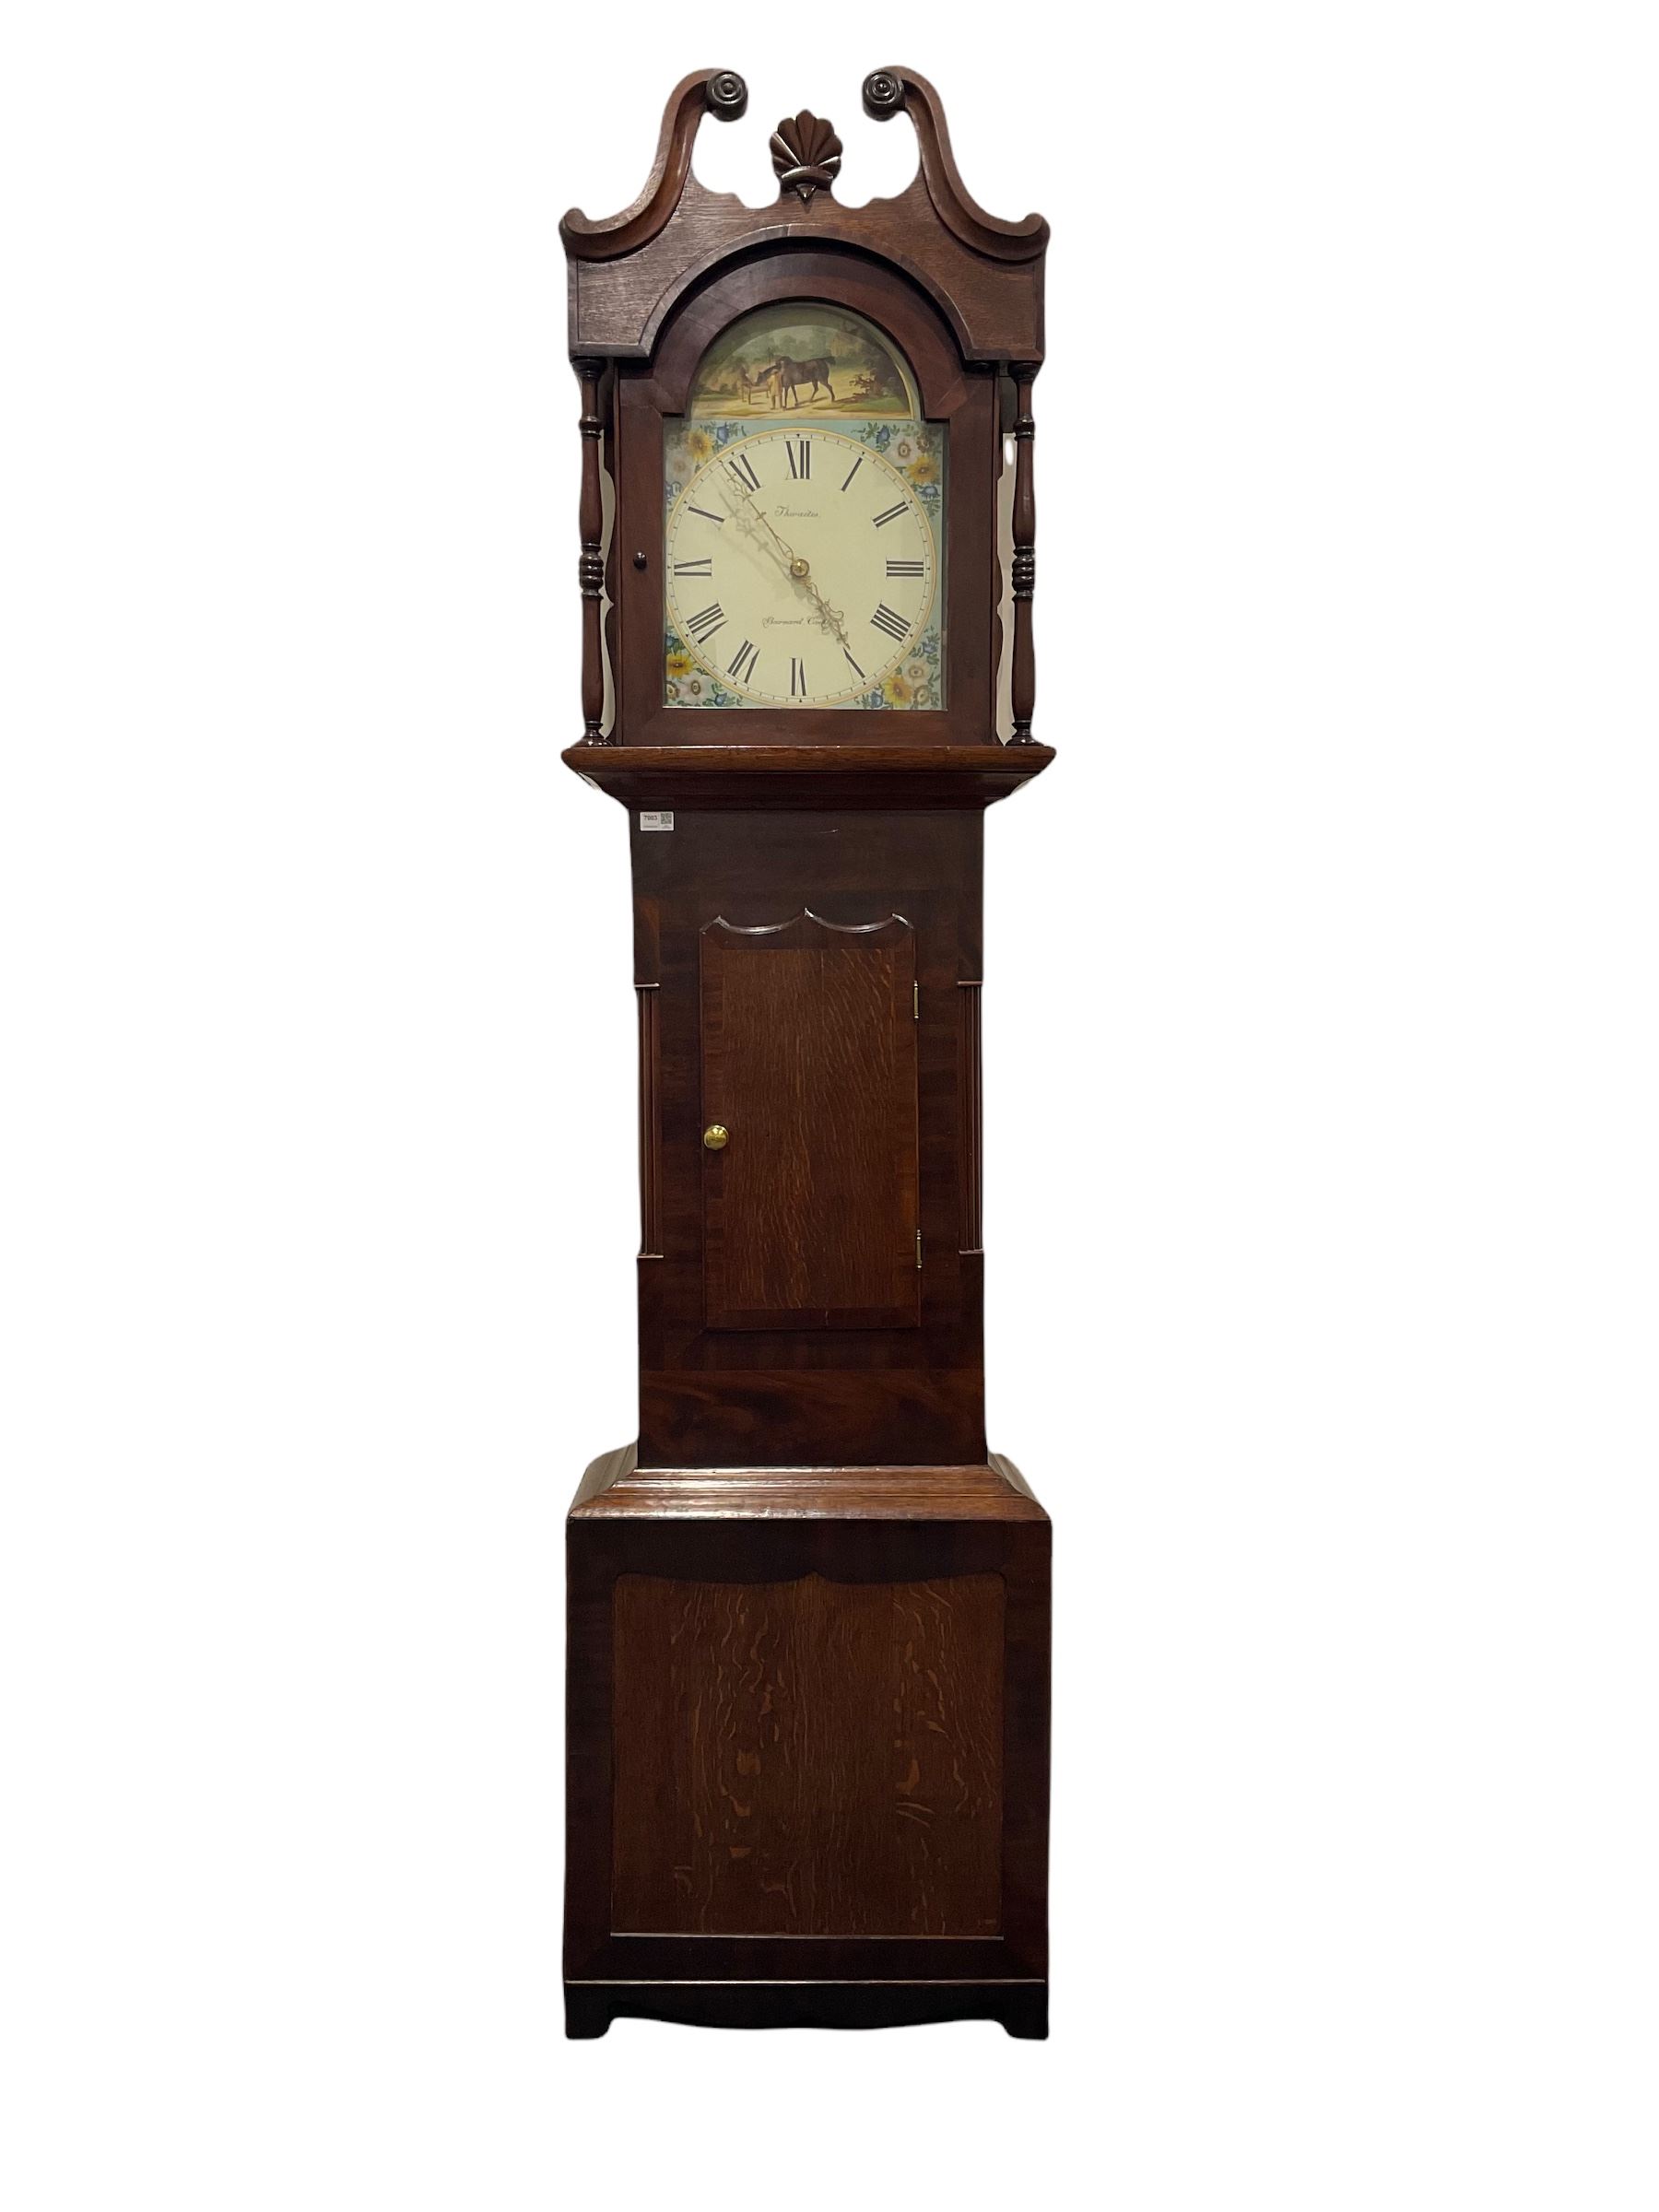 An oak and mahogany 30hour longcase clock c1850 with a swans neck pediment